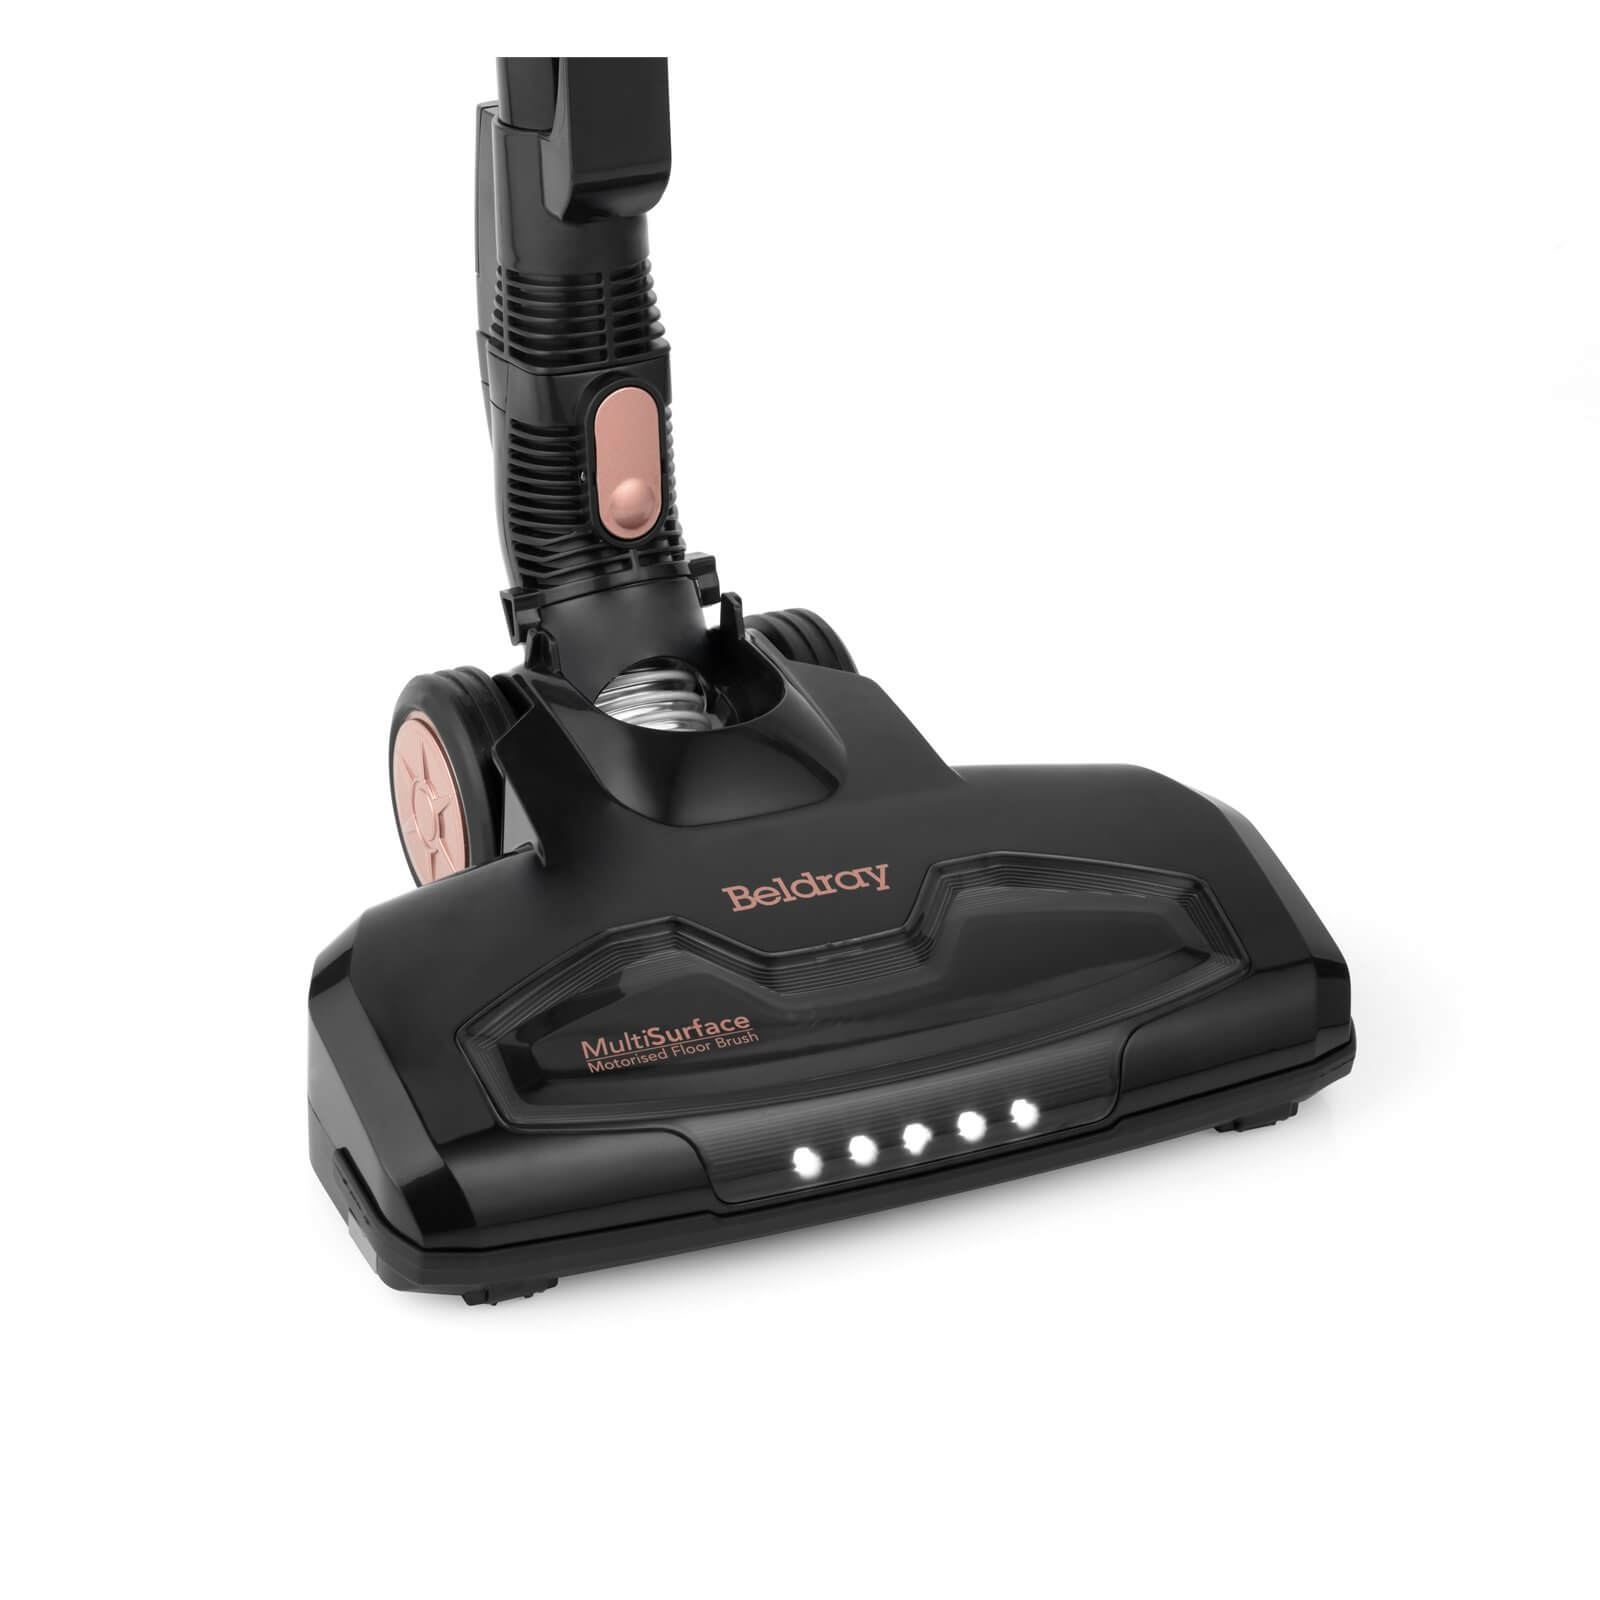 Beldray Airgility Max Cordless 2-in-1 Multi-Surface Vacuum Cleaner